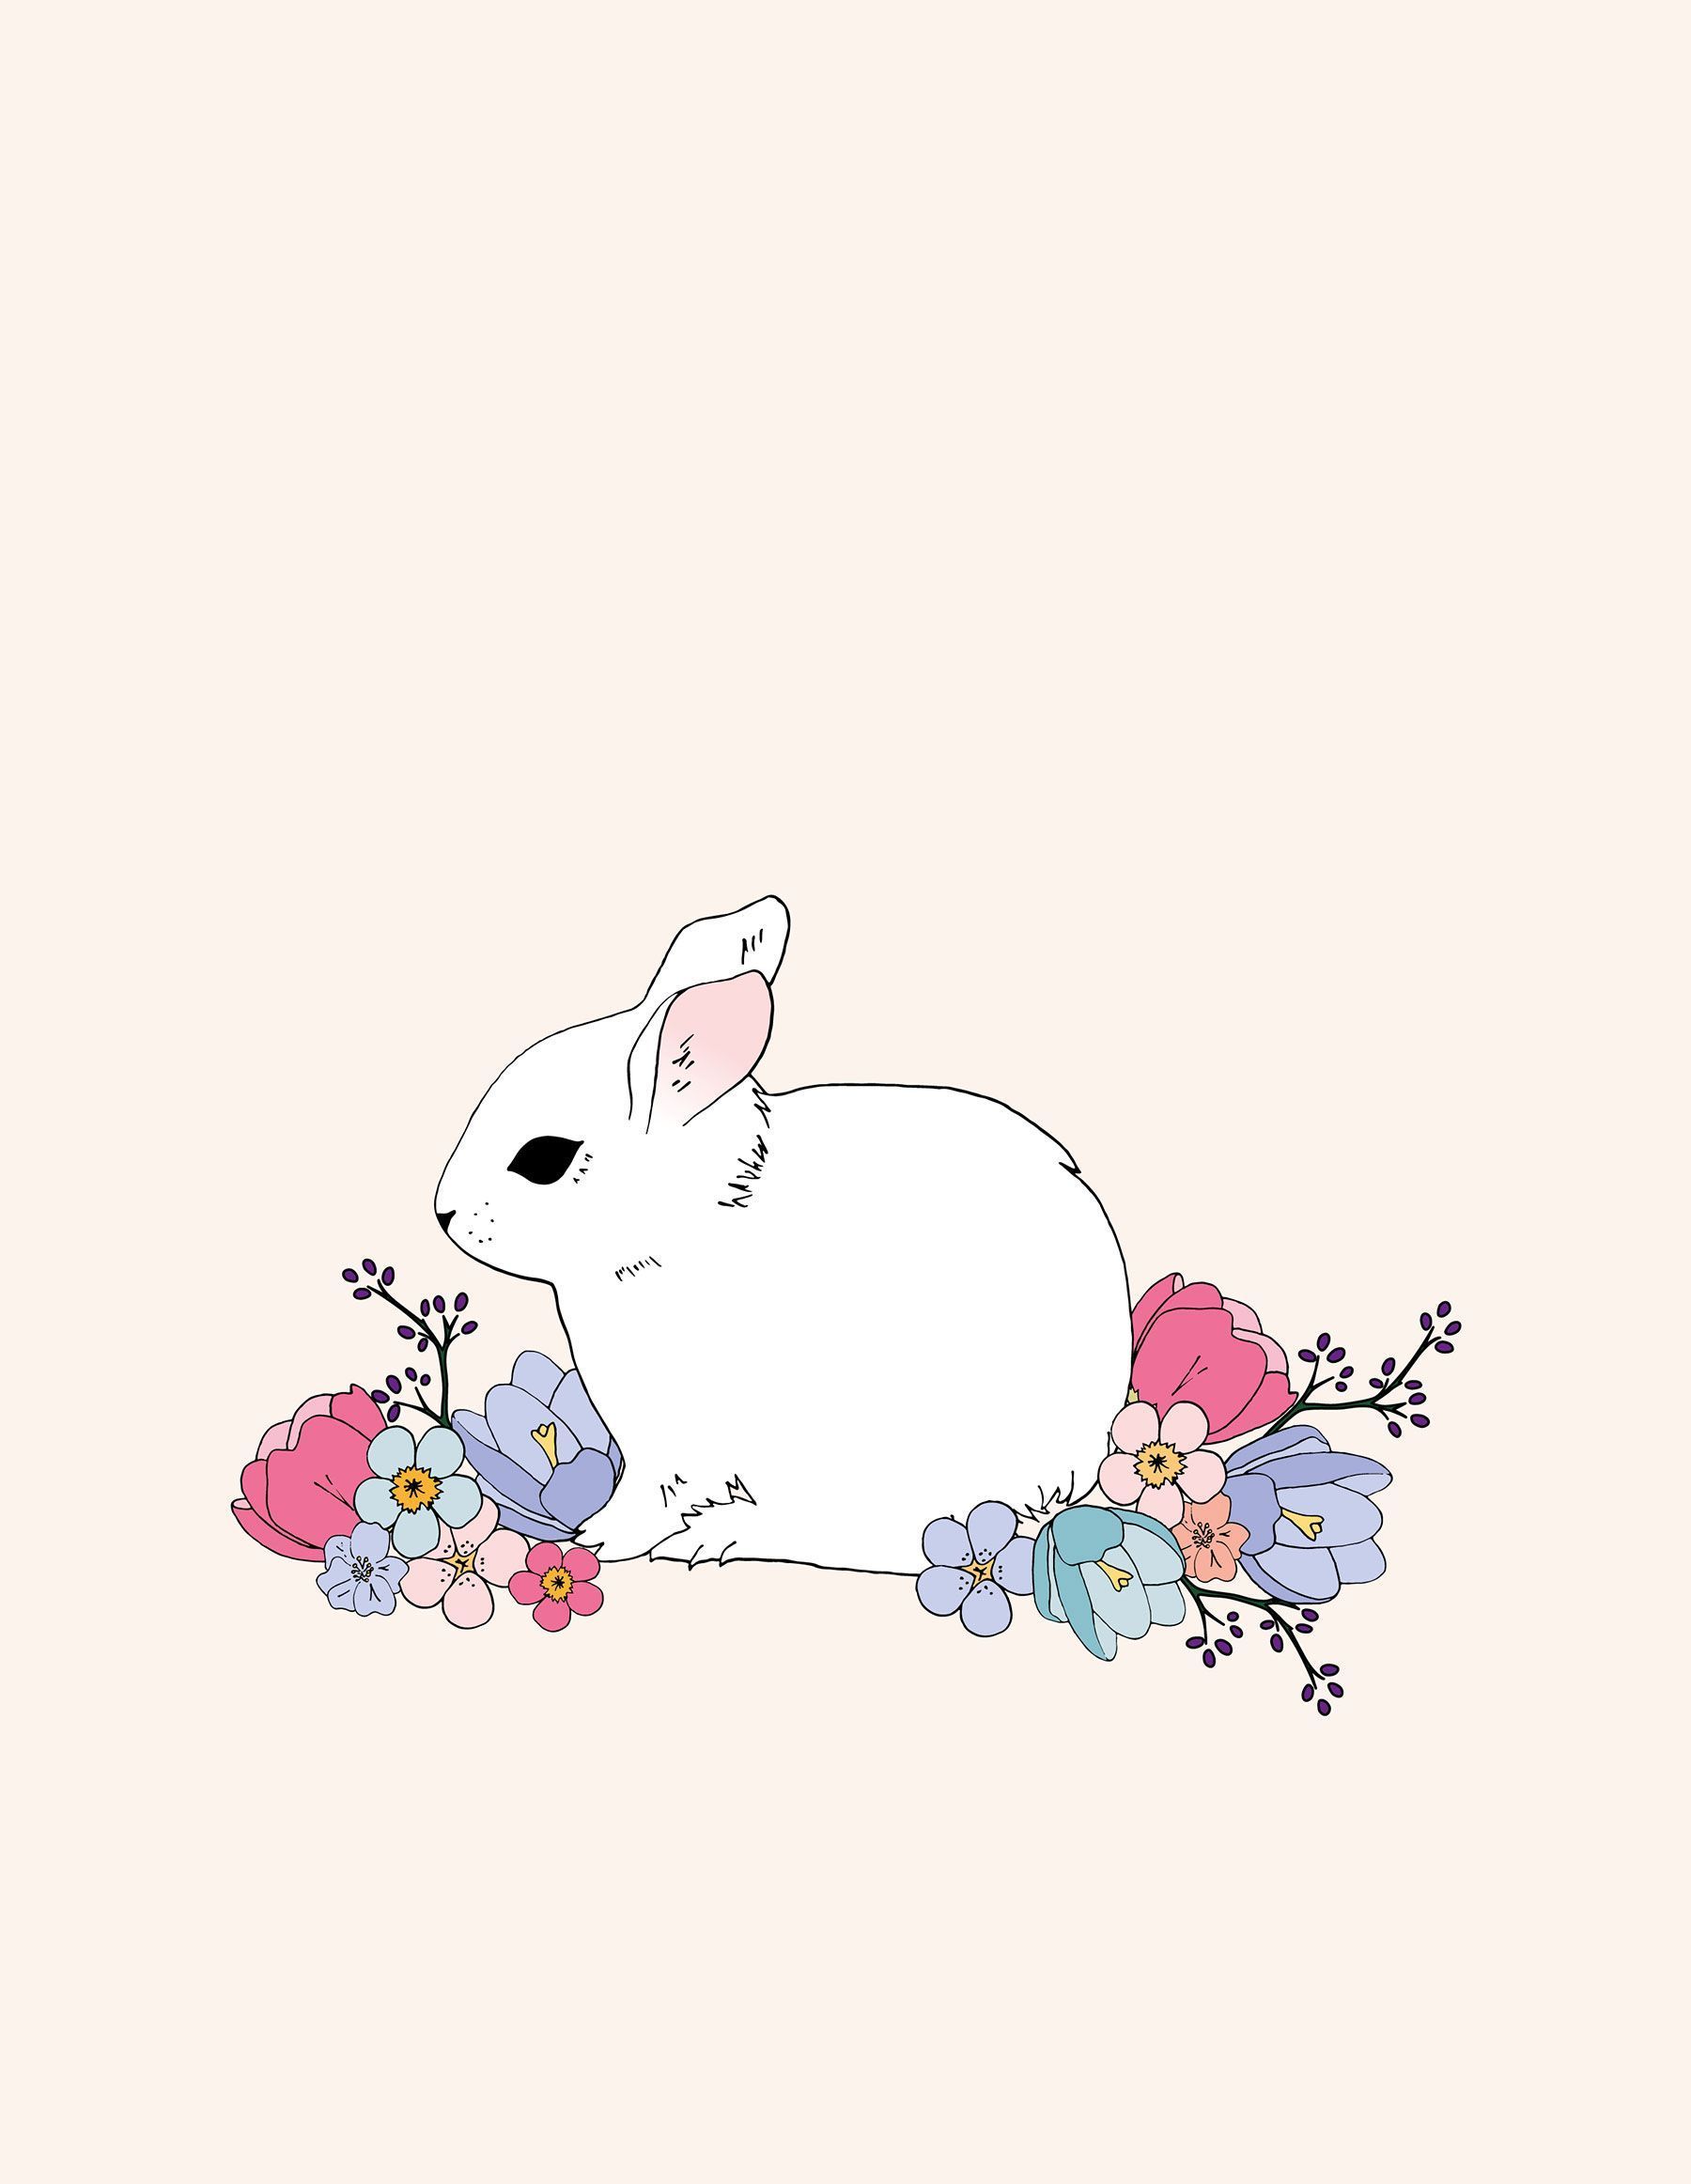 A white rabbit surrounded by flowers - Easter